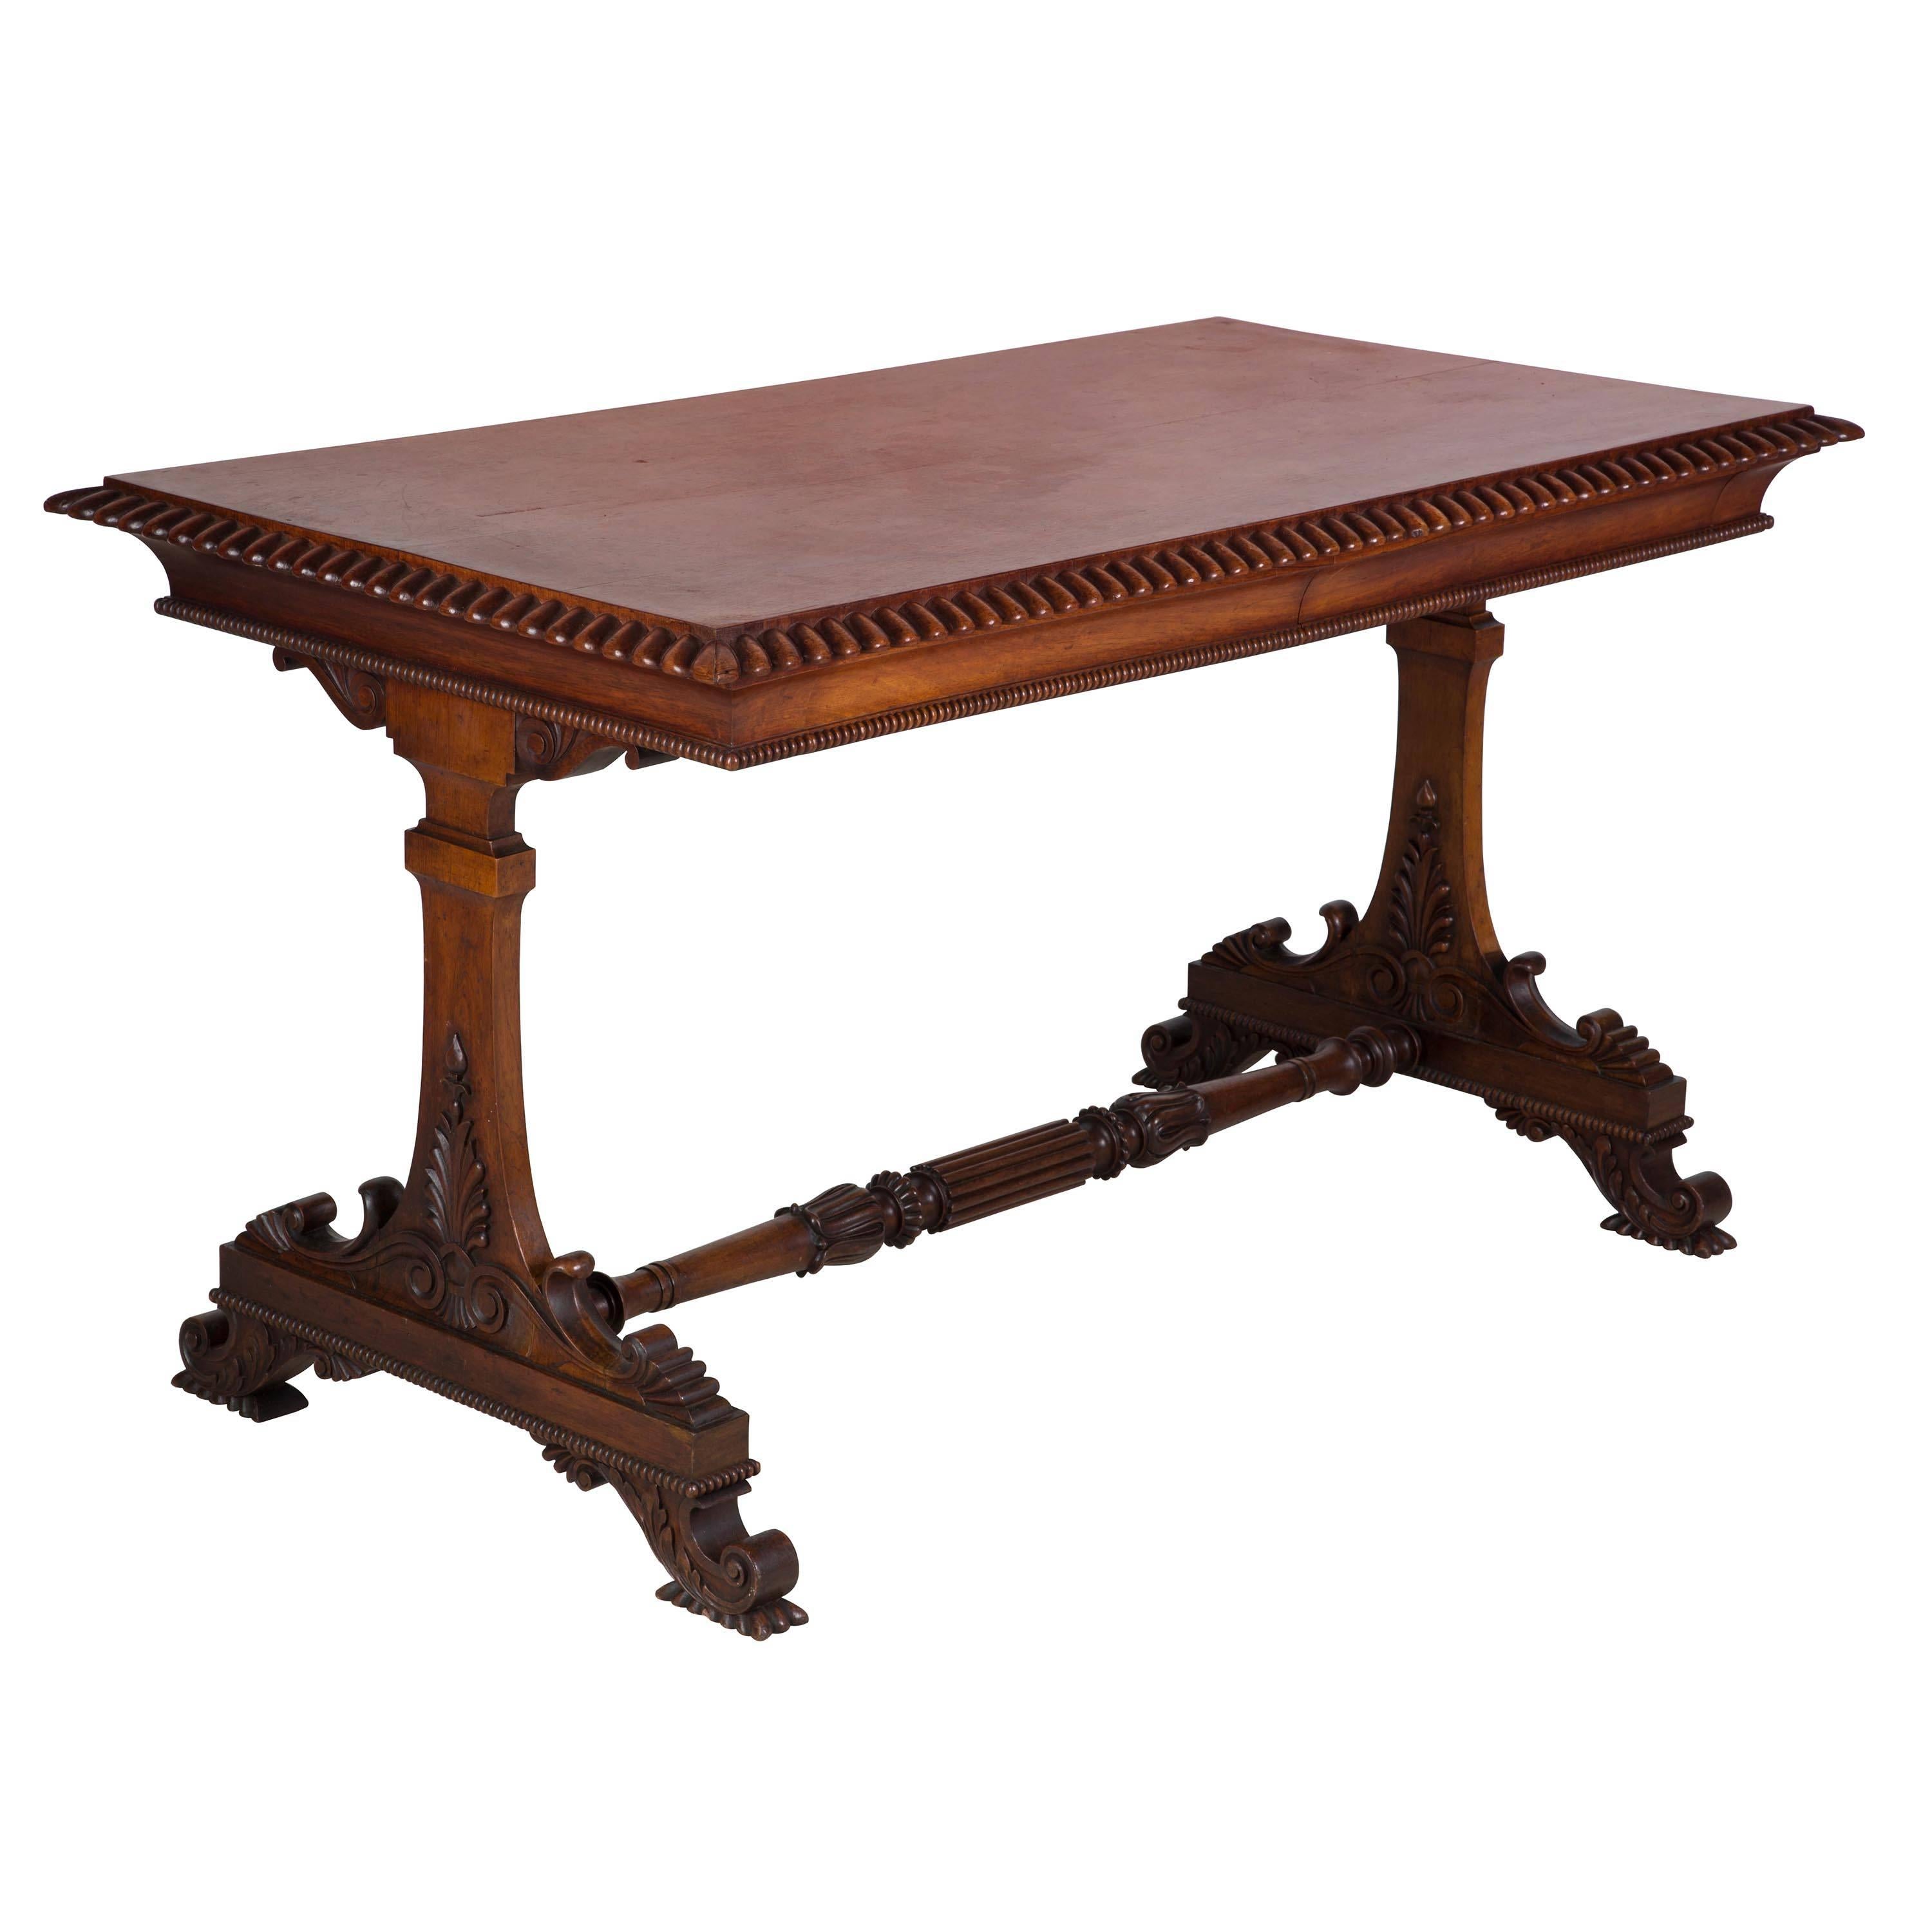 Neoclassical rosewood library table designed by William Trotter, circa 1820.